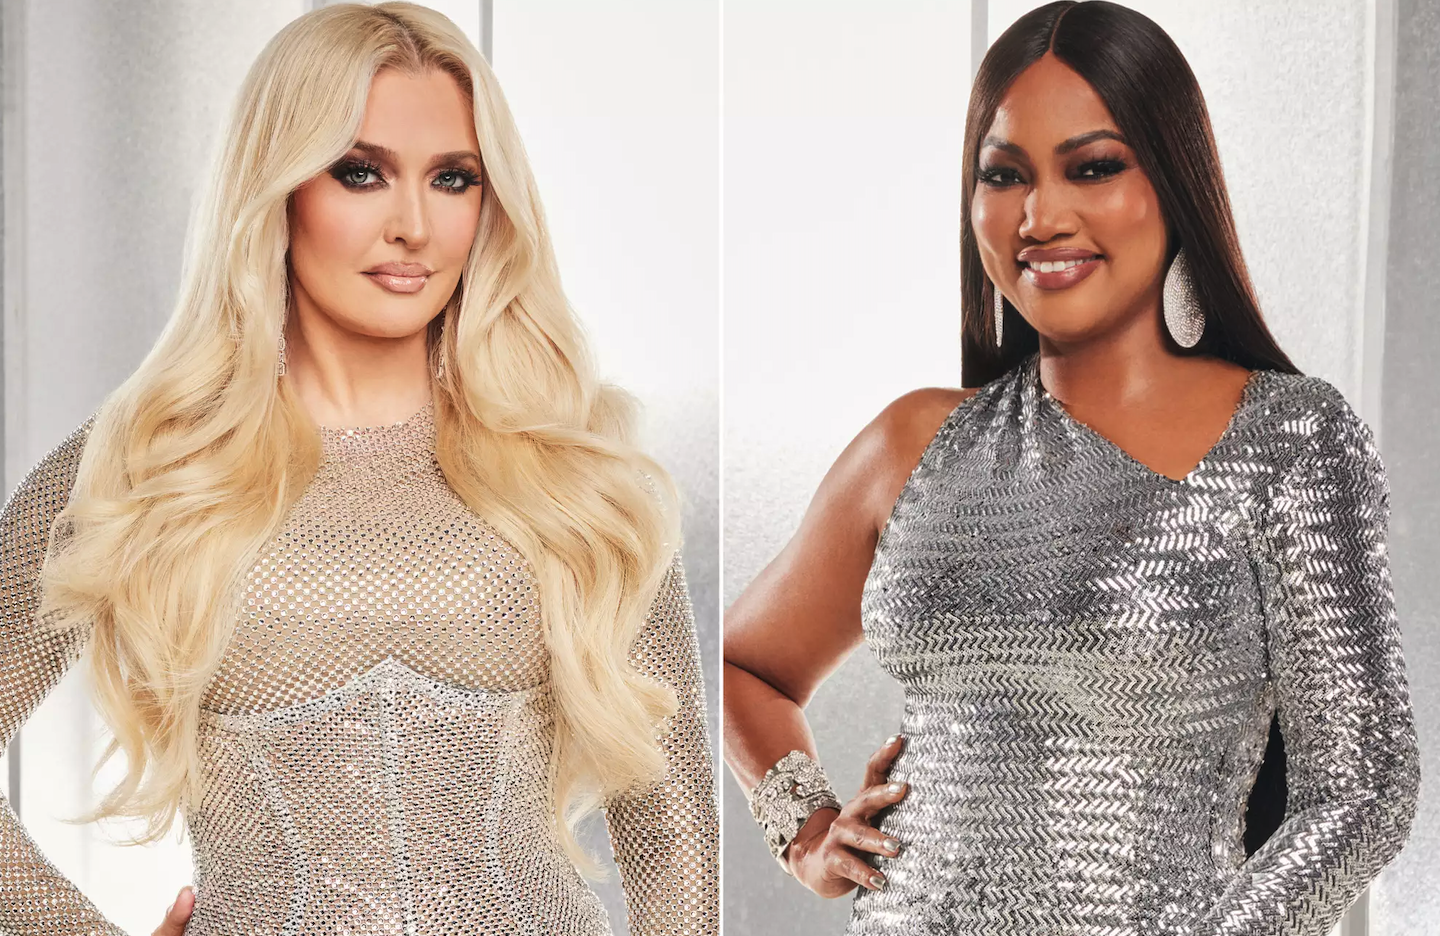 Erika Jayne Reveals REAL Reason For Feud With Garcelle Beauvais!